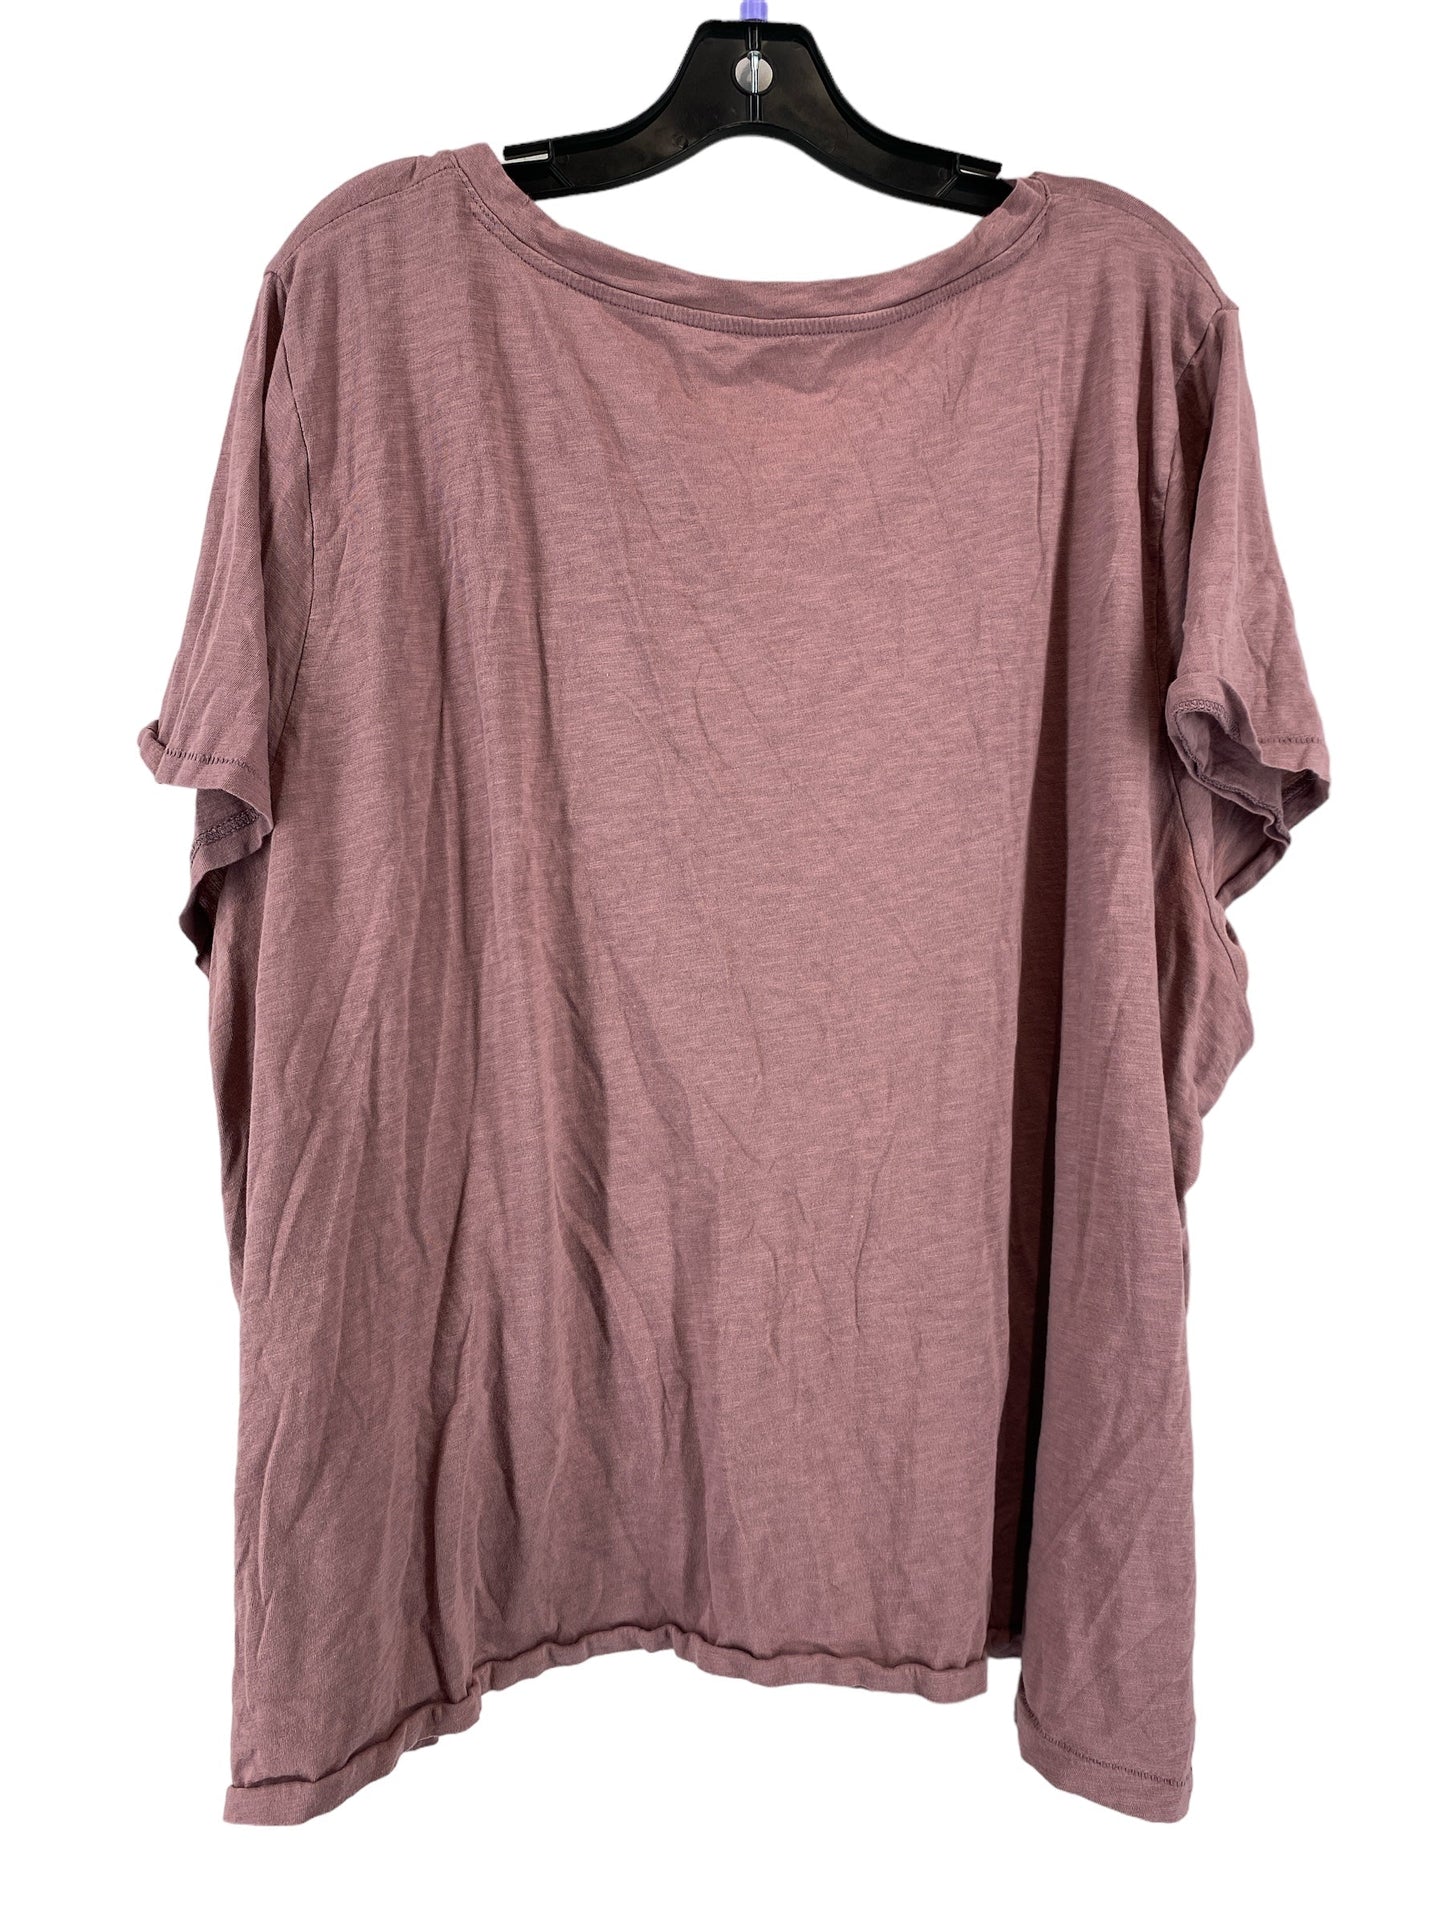 Top Short Sleeve By Madewell  Size: 4x